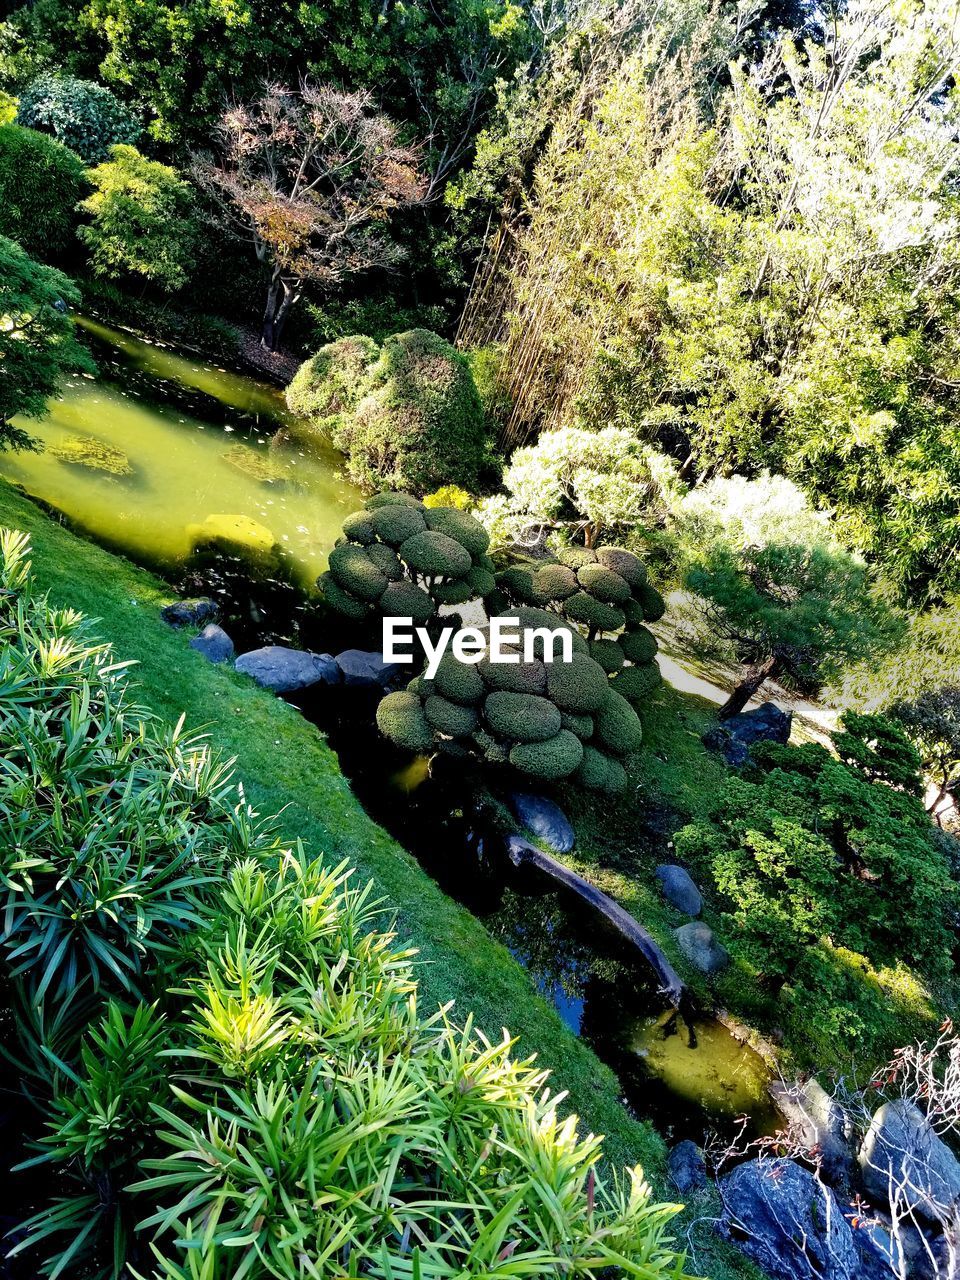 HIGH ANGLE VIEW OF PLANTS AND ROCKS IN WATER